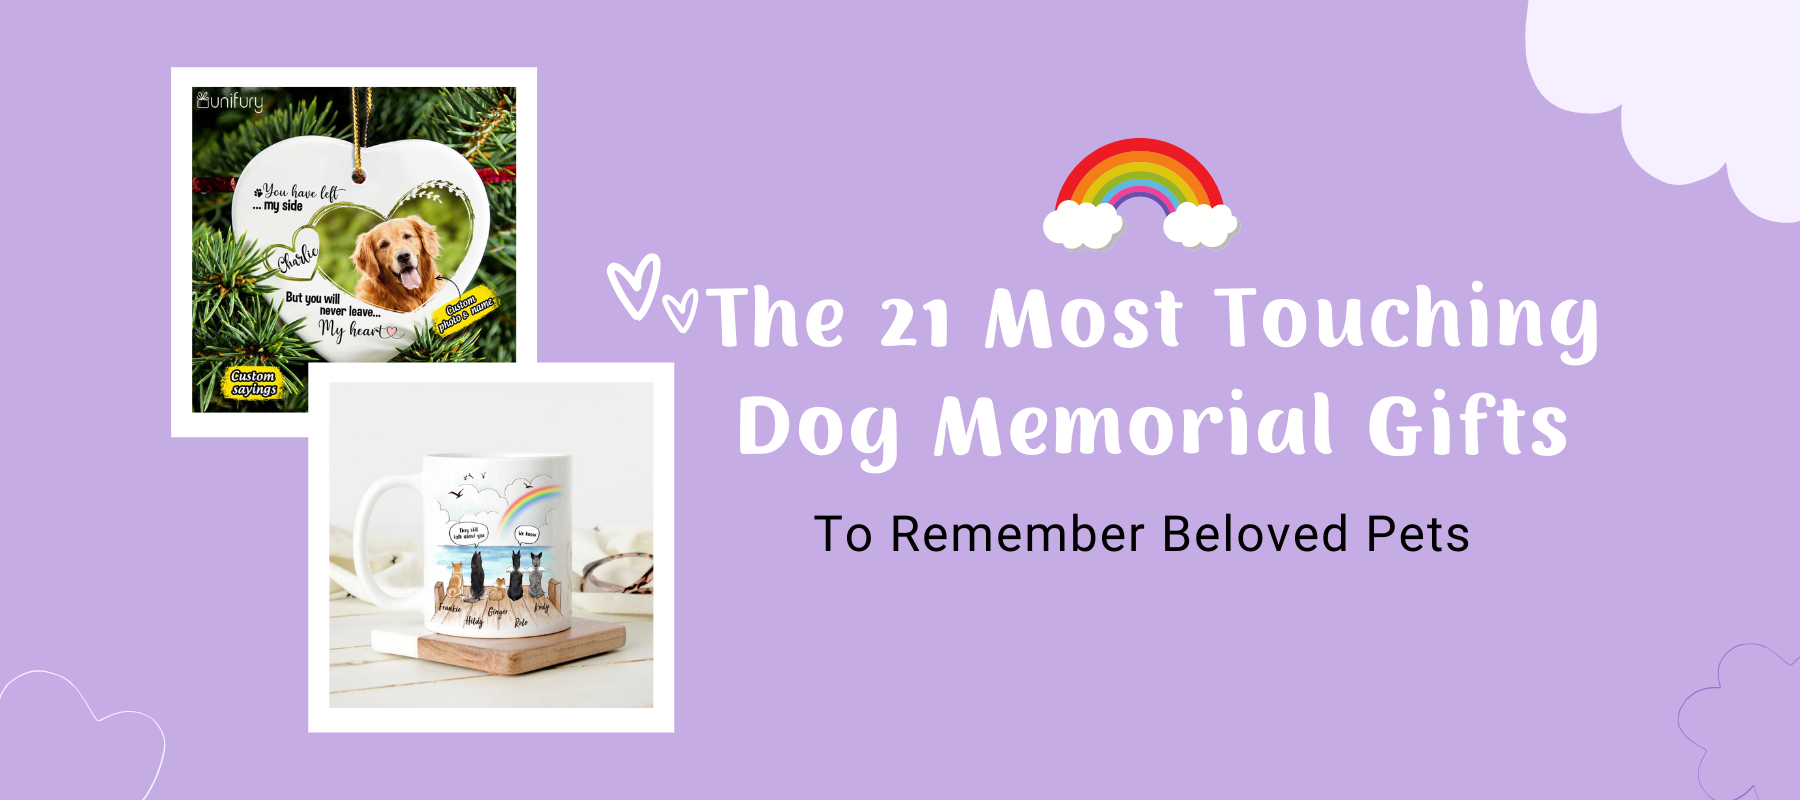 The 21 Most Touching Dog Memorial Gifts to Remember Beloved Pets